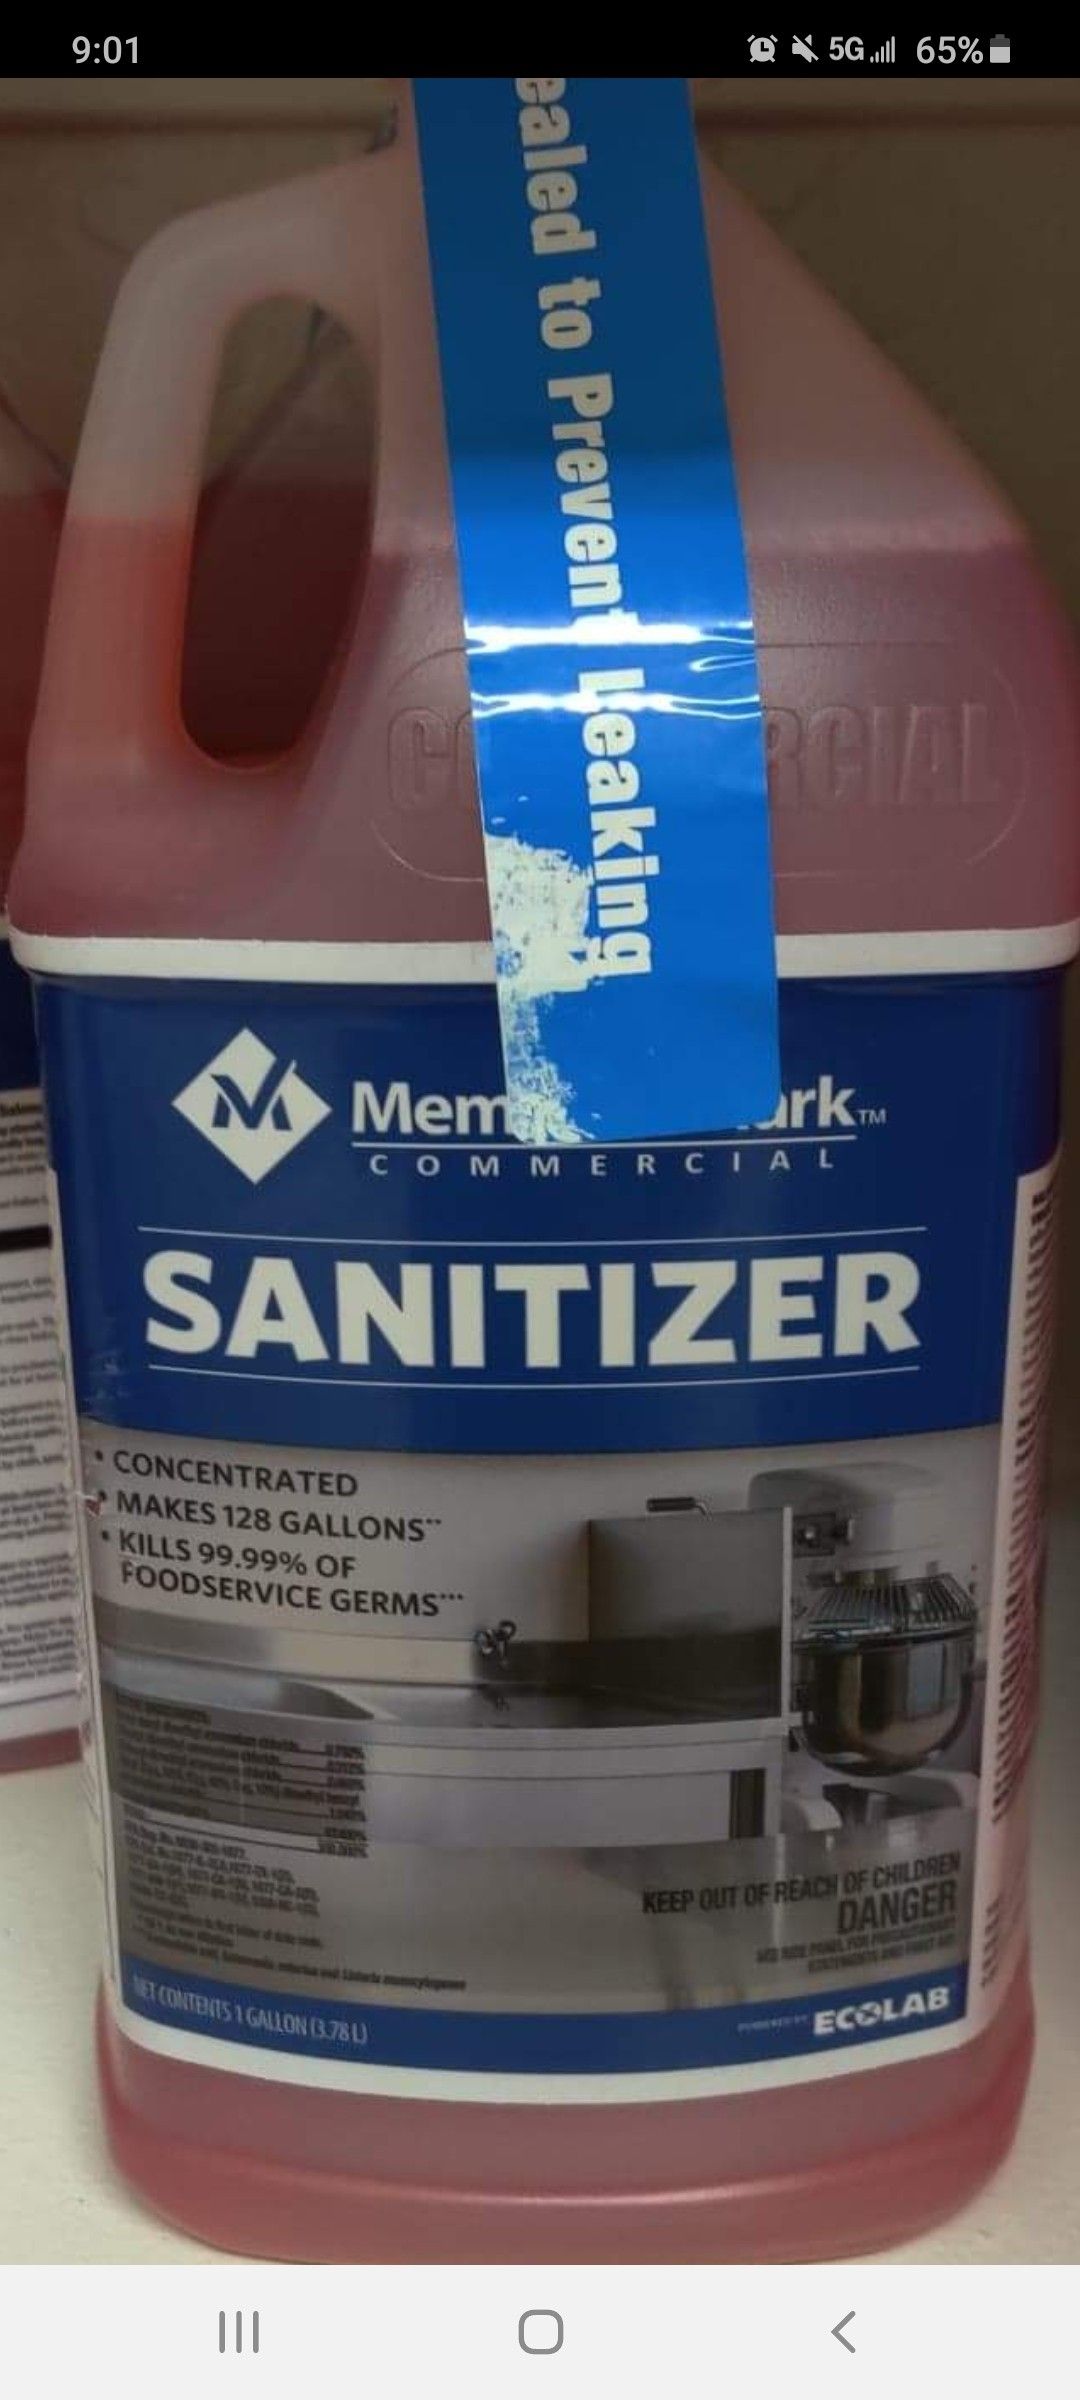 Commercial Sanitizer makes 128 gallons!!!